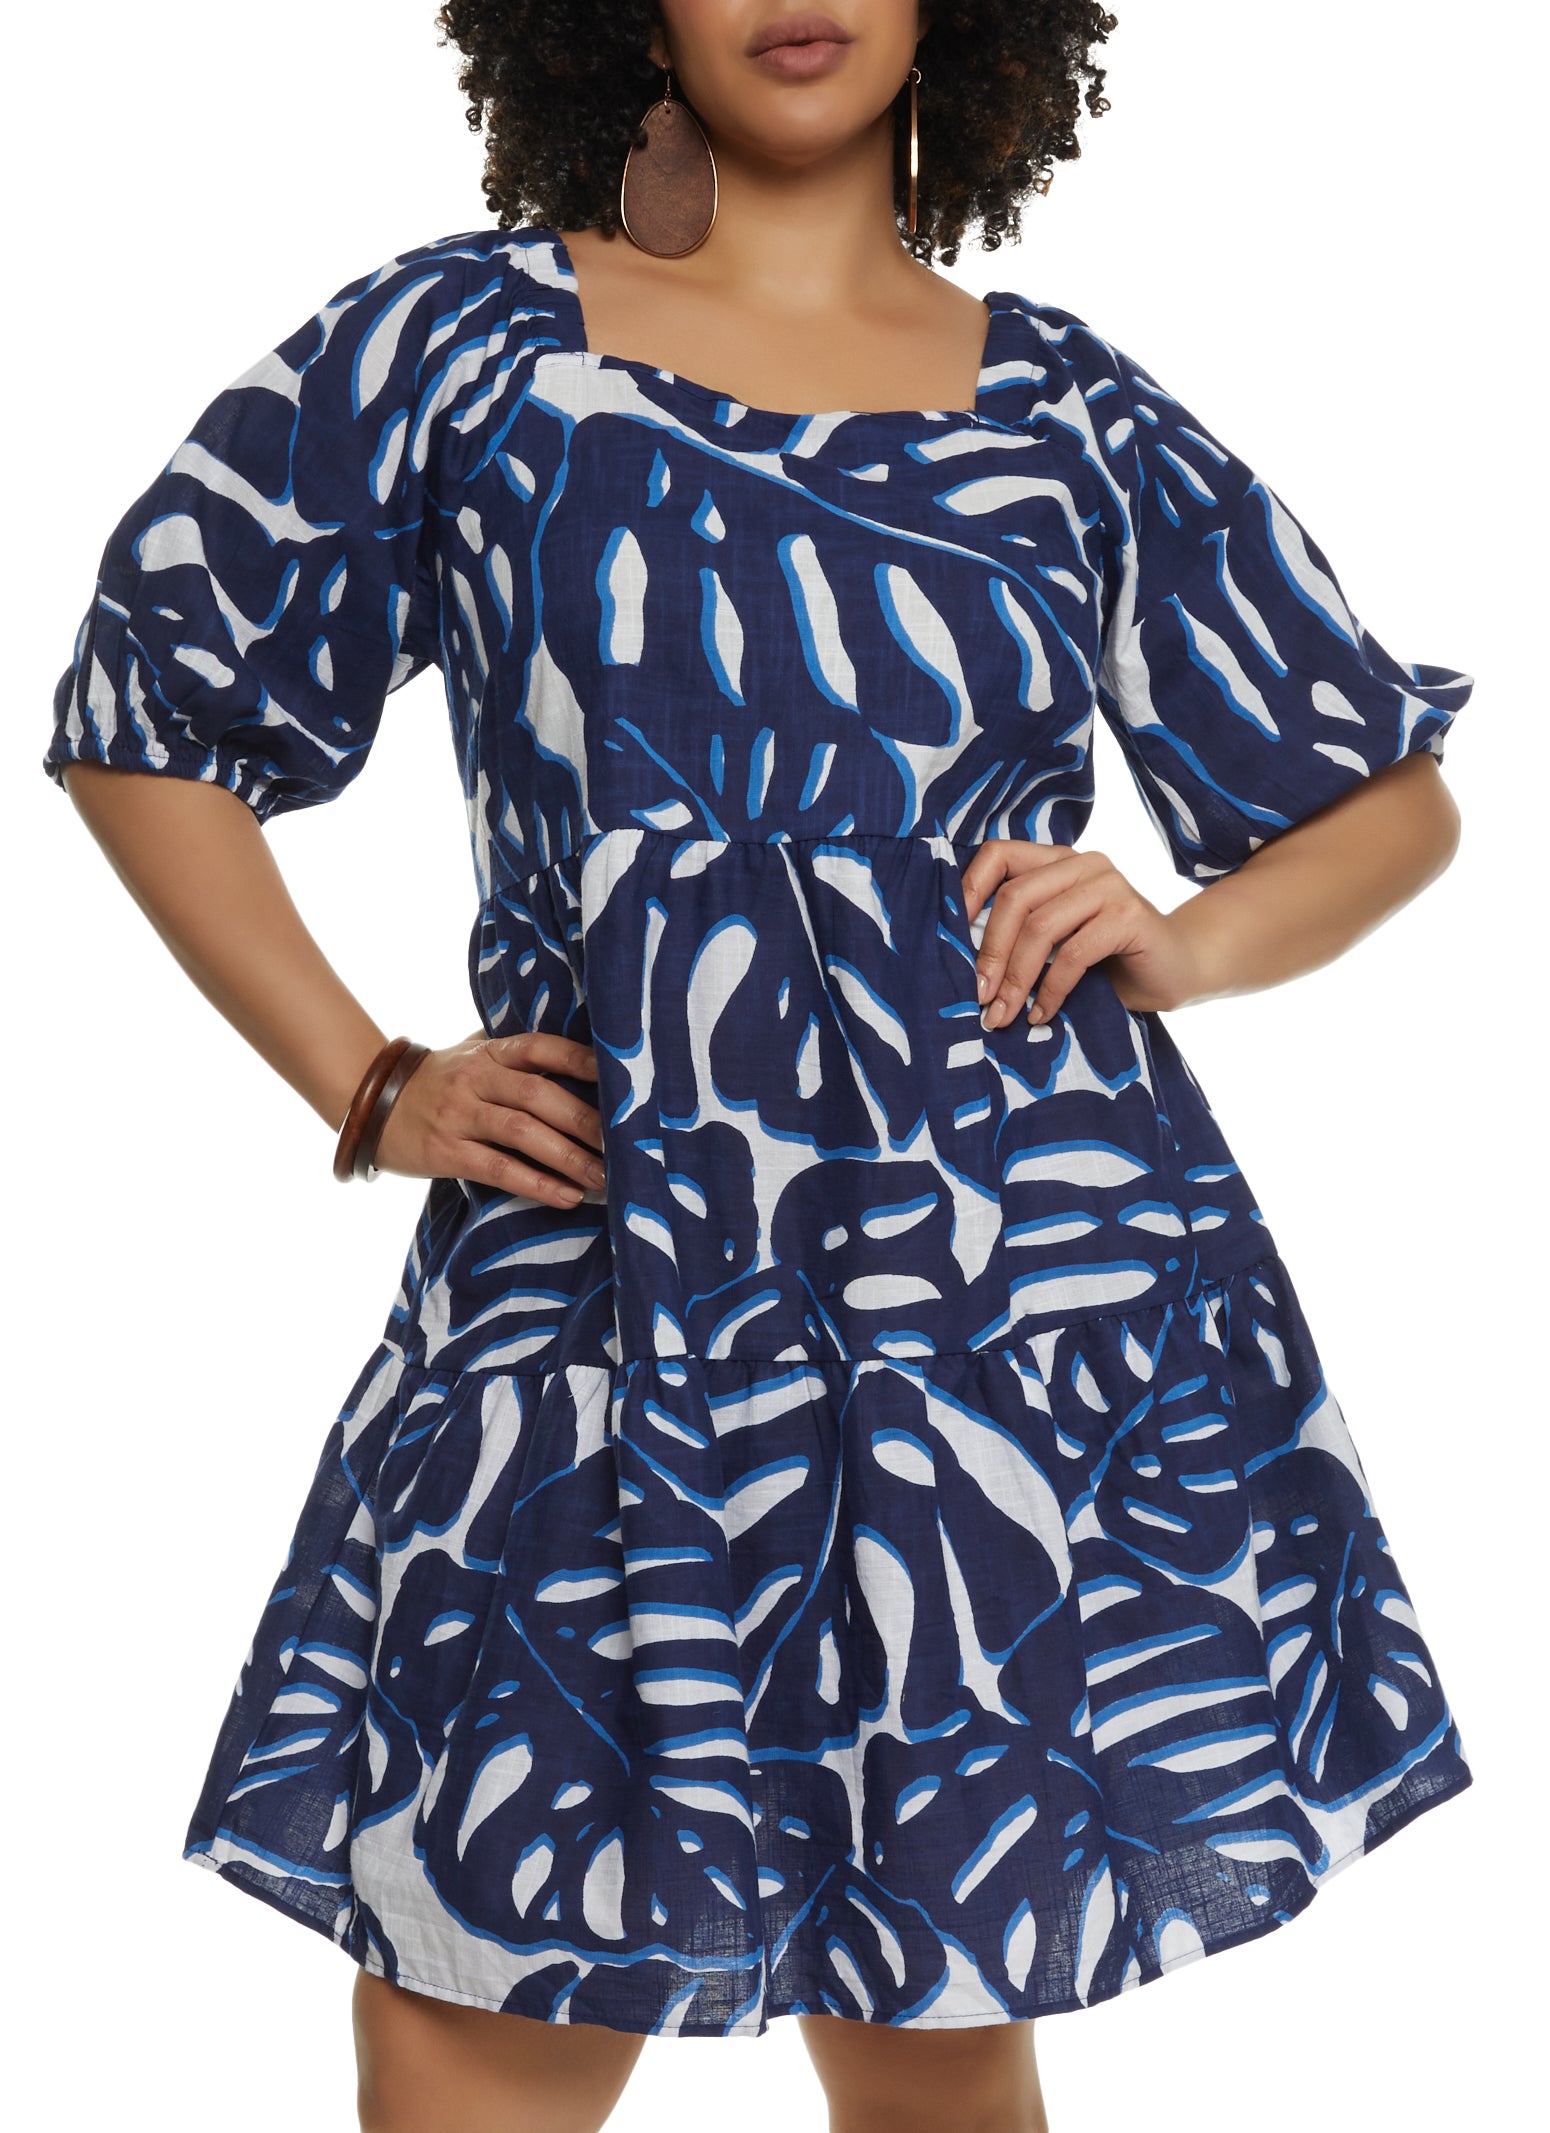 Plus Size Summer Dresses, Everyday Low Prices